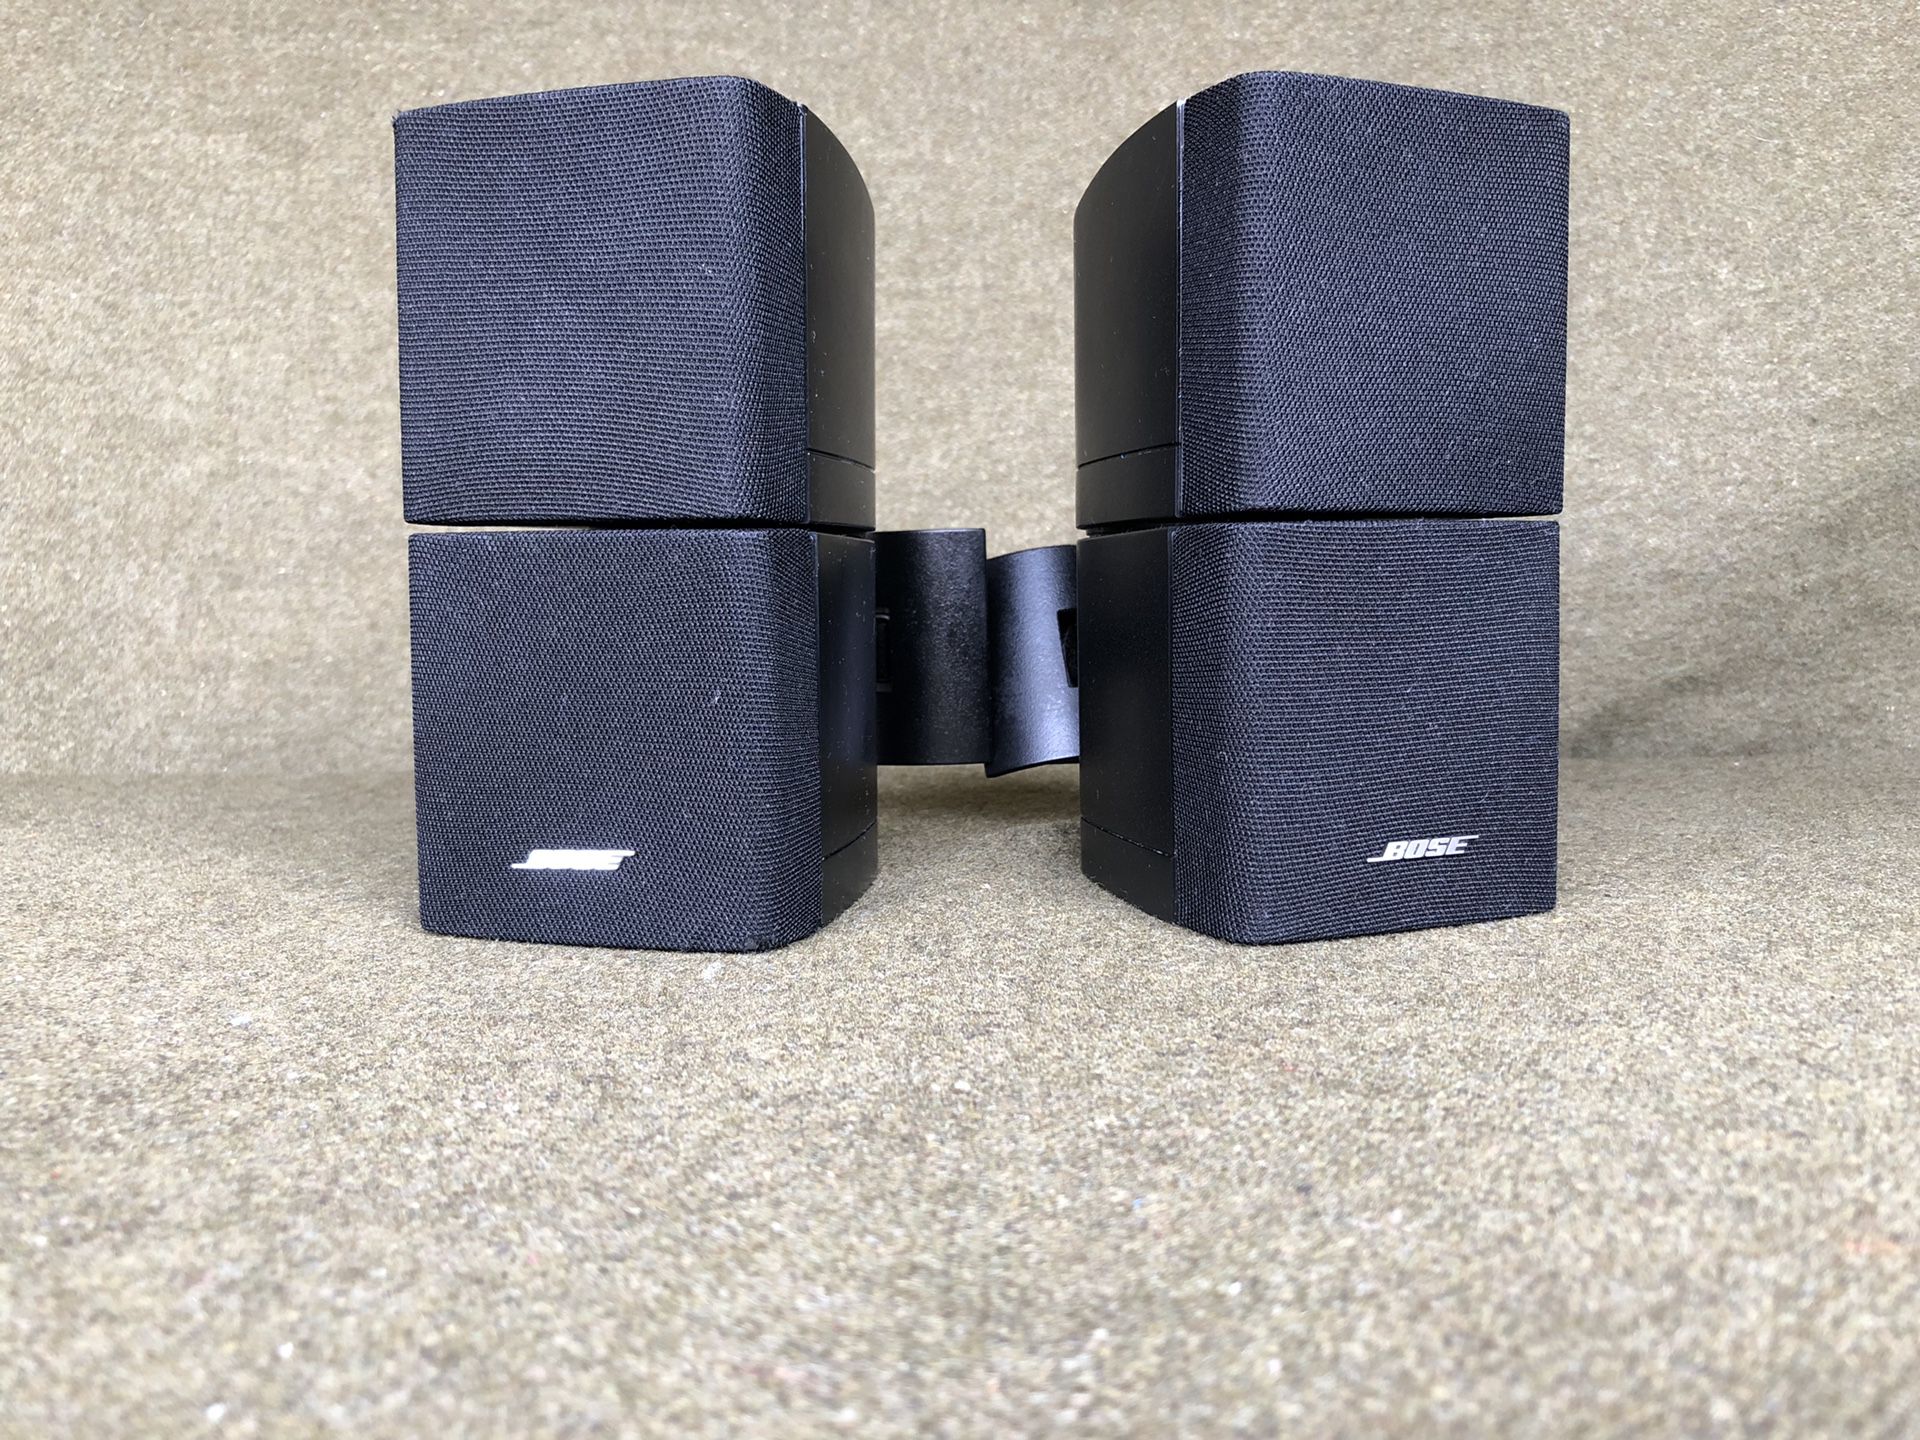 Bose~ Double Cube Omni-directional surround speakers pair (2x) W/wall mount brackets universal 8 ohms 100watts..